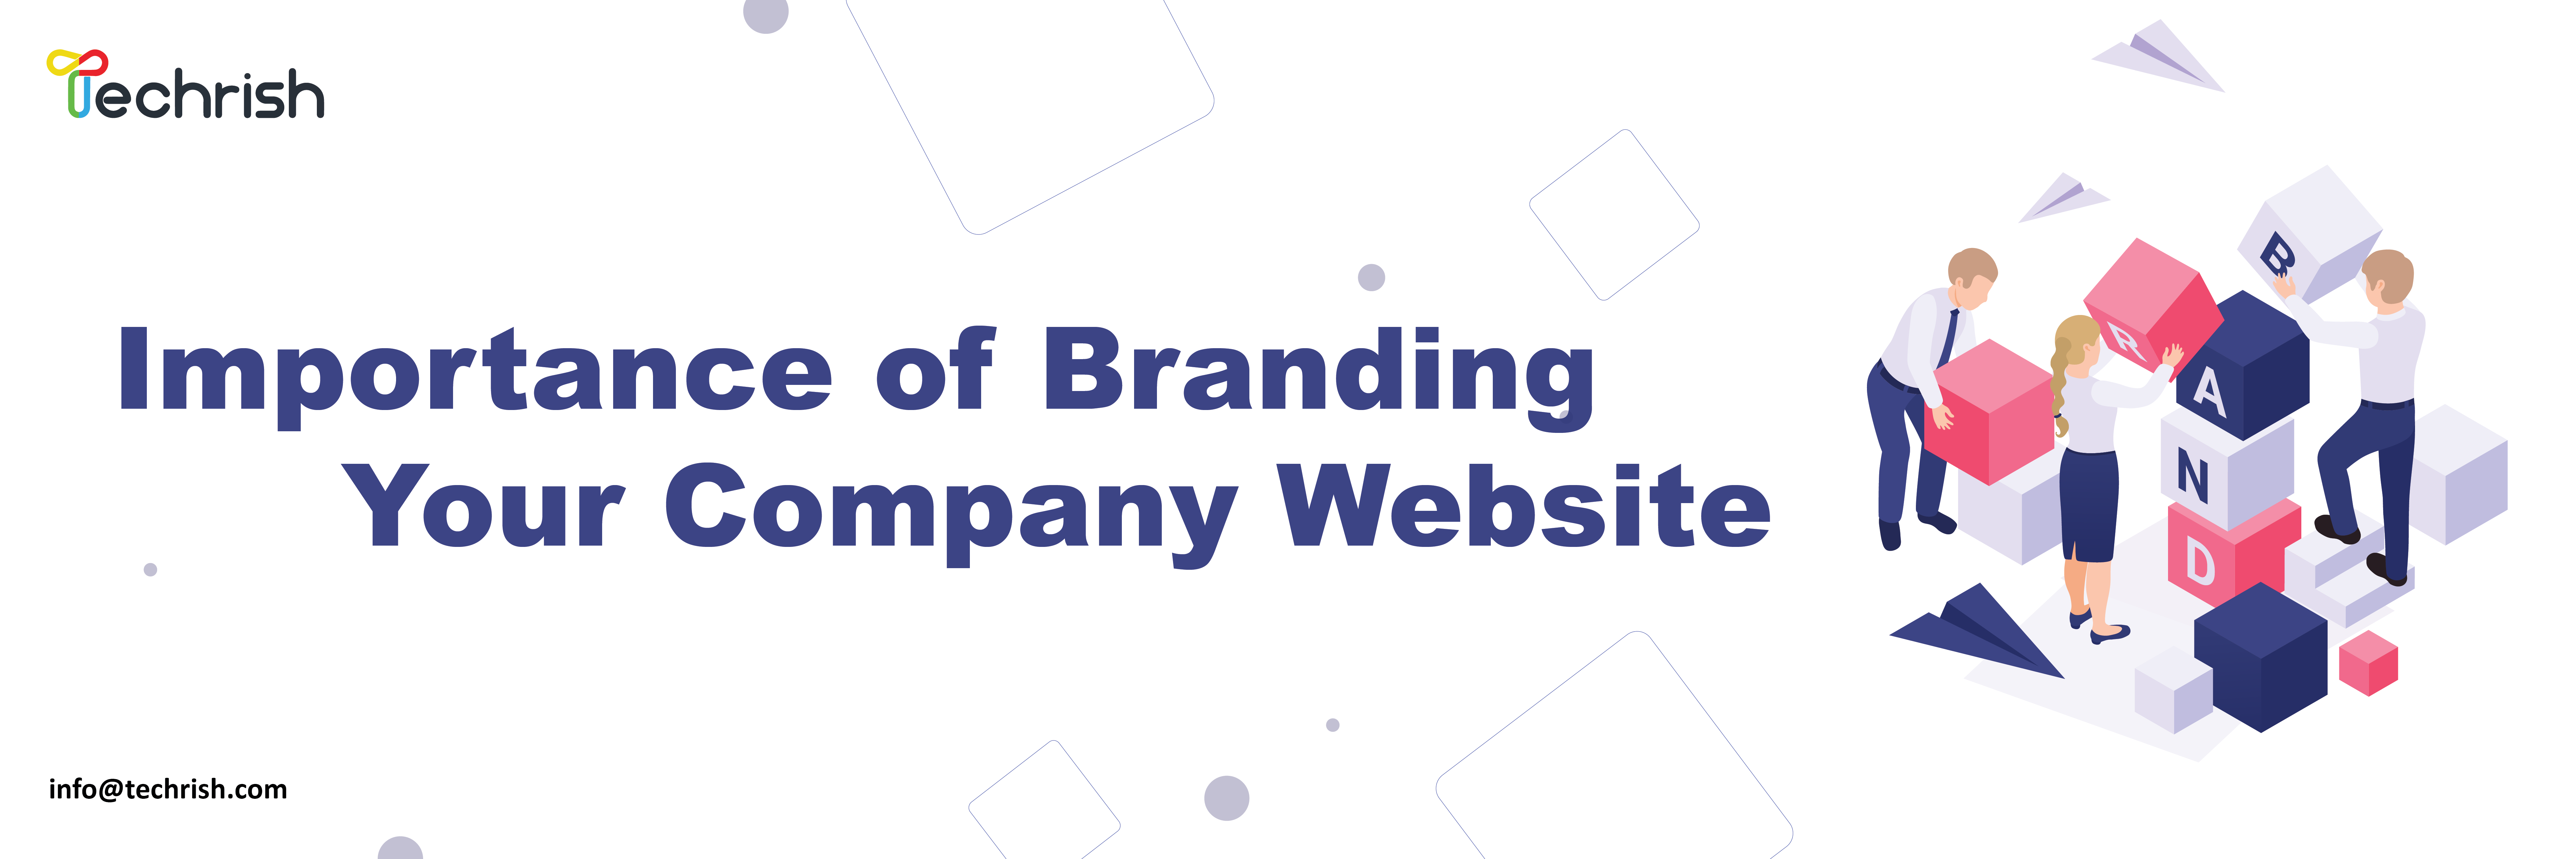 Importance of Branding Your Company Website